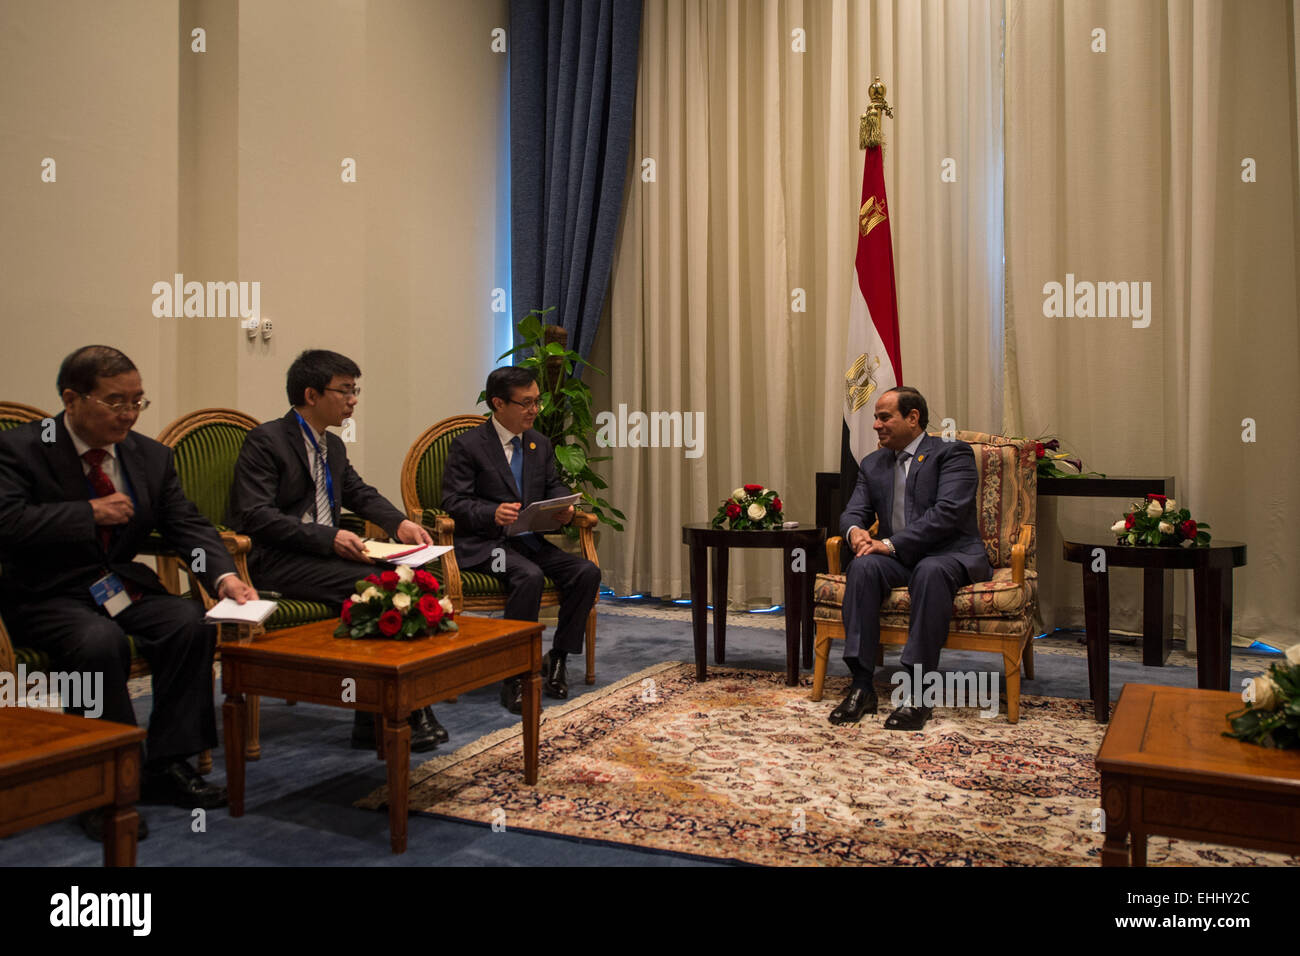 (150314) -- SHARM EL SHEIKH(EGYPT), March 14, 2015 (Xinhua) -- Egypt's President Abdel Fattah al-Sisi (1st R) meets with Gao Hucheng (2nd R), Special Envoy of Chinese President Xi Jinping and Chinese Minister of Commerce, at the Congress Hall where Egypt Economic Development Conference (EEDC) is held, in Sharm el Sheikh, South Sinai in Egypt, on March 14, 2015. (Xinhua/Pan Chaoyue) (dzl) Stock Photo